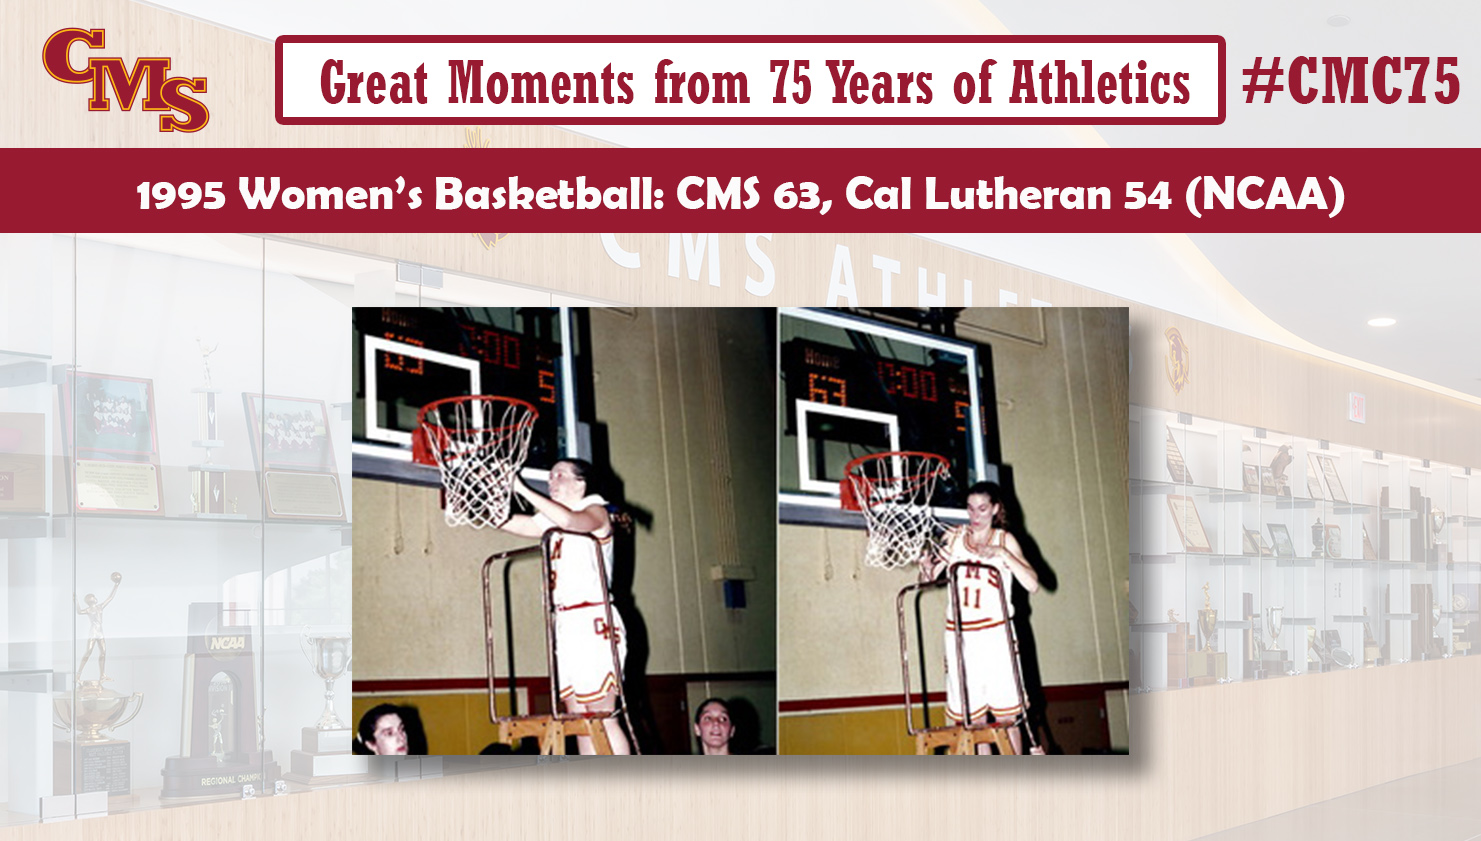 Colleen Tribby and Heather Schroder cutting down the nets after the win. Words over the photo read: Great Moments from 75 Years of Athletics. 1995 Women's Basketball: CMS 63, Cal Lutheran 54 (NCAA)